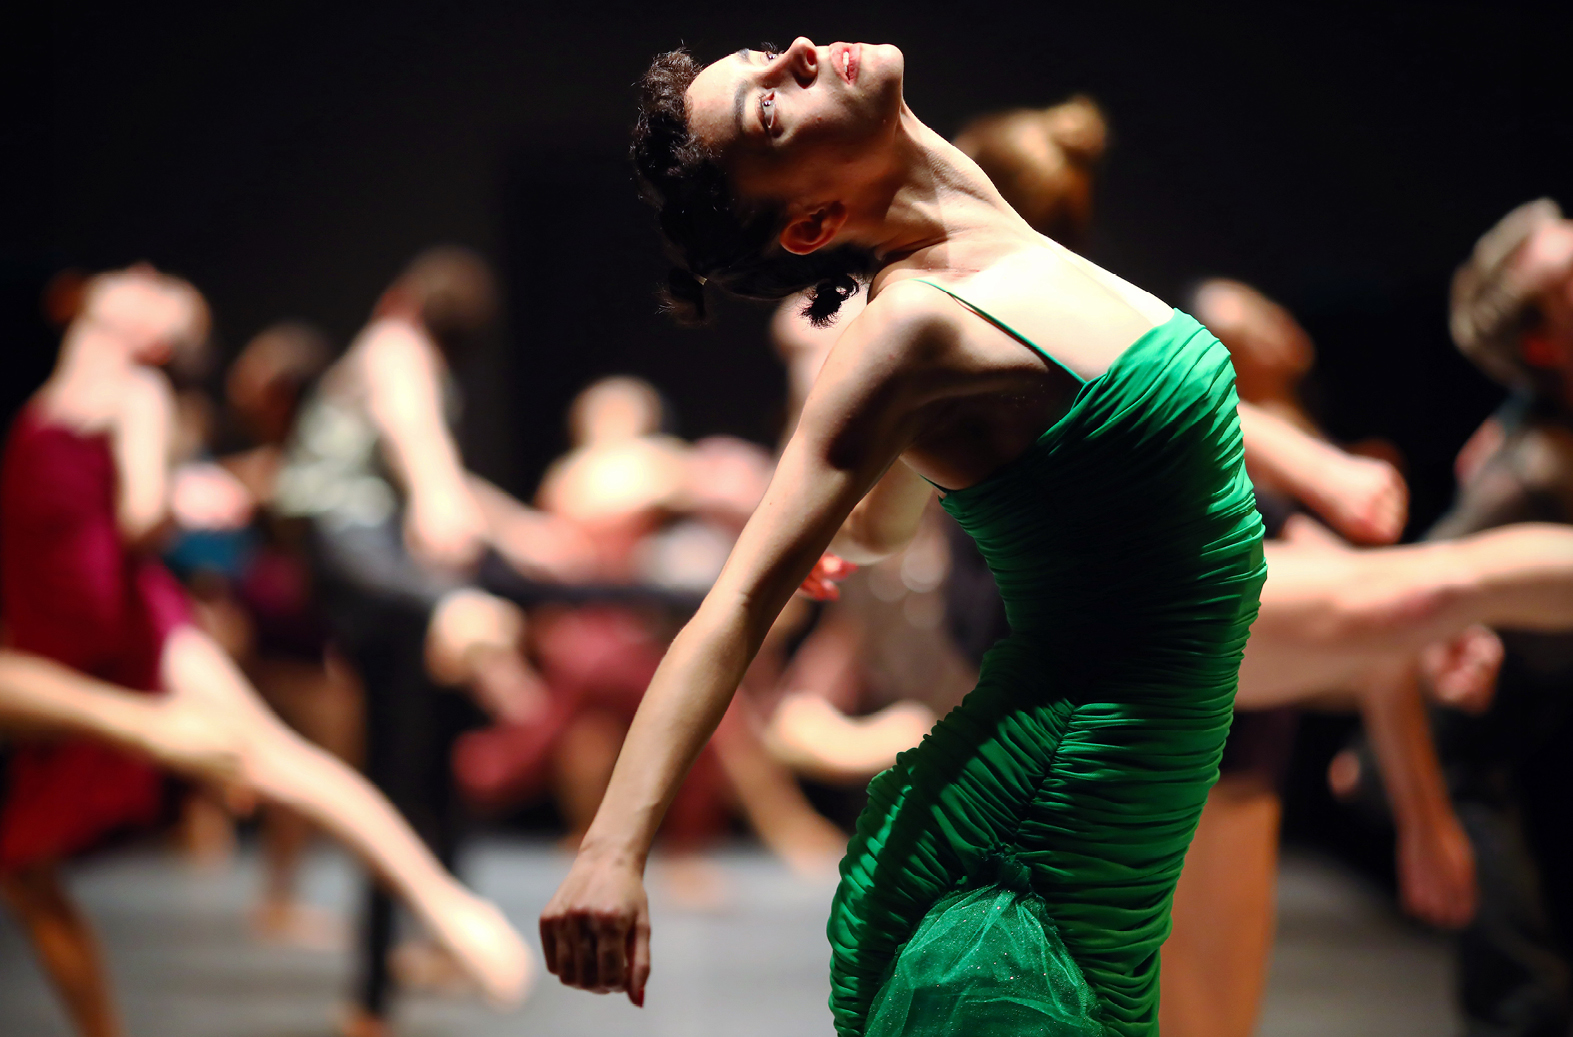 Picture of Event: 2019 by Ohad Naharin